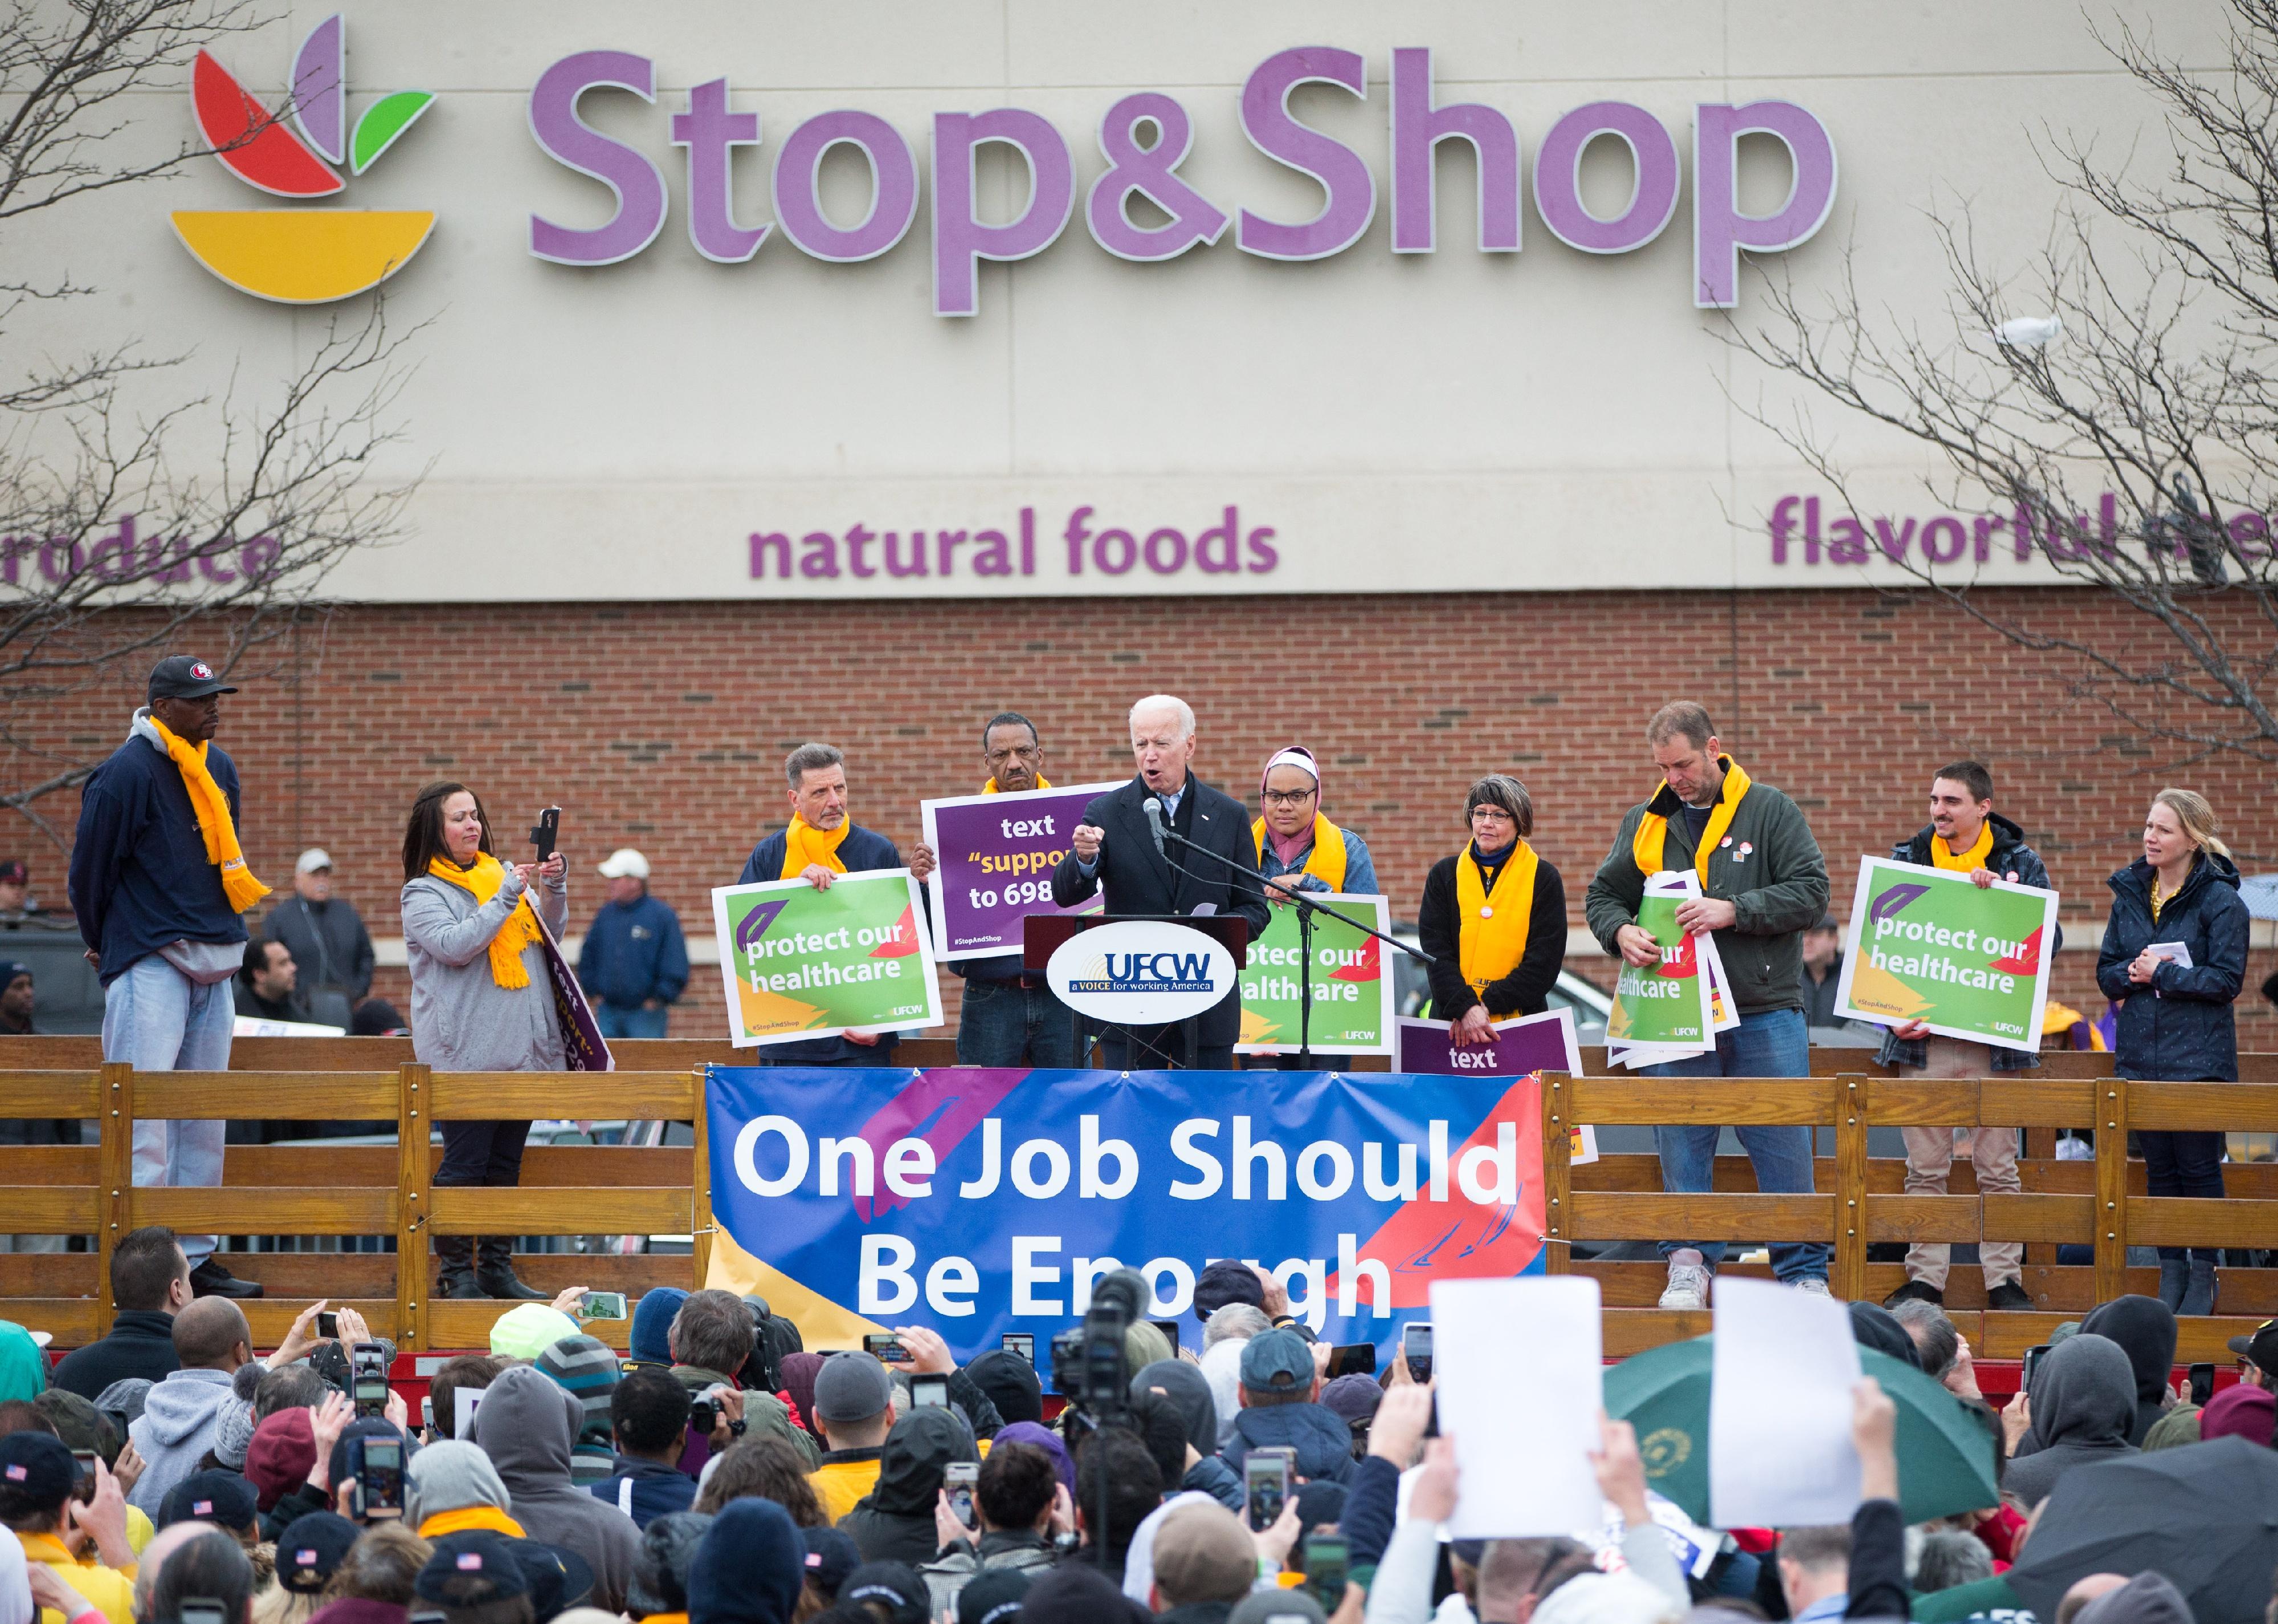 Biden speaks to protesting workers at a grocery store.